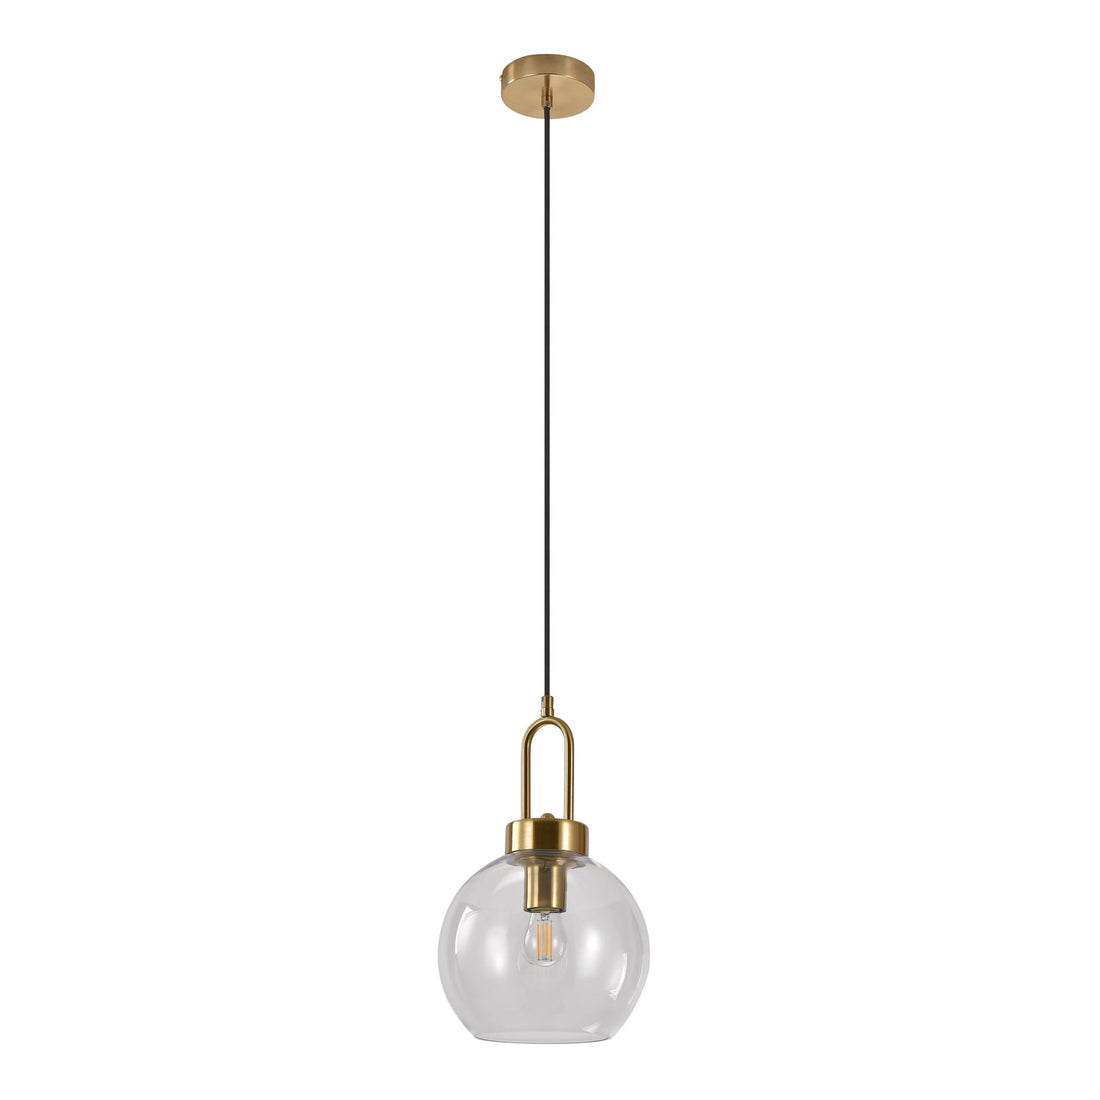 Luton pendant - pendant in spherical clear glass and brass fring 150 cm fabric cord bulb: E27/40W - 1 - pcs